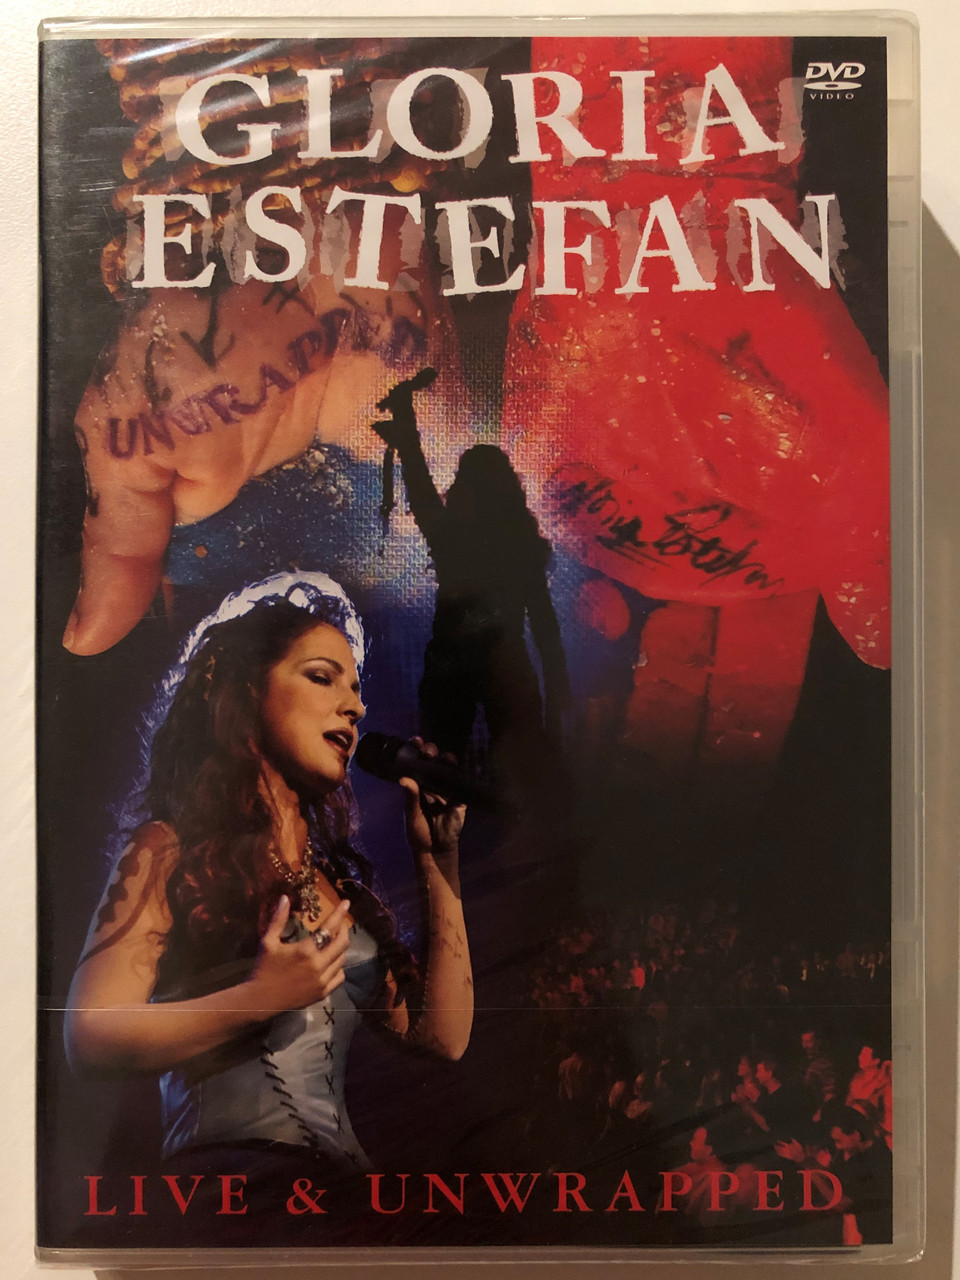 Gloria_Estefan_-_Live_and_Unwrapped_STAGE_SHOW_PRODUCED_DIRECTED_STAGED_BY_KENNY_ORTEGA_CONCEIVED_BY_GLORIA_ESTEFAN_EMILIO_ESTEFAN_KENNY_ORTEGA_DIRECTED_BY_LAWRENCE_JO___11886.1692181477.1280.1280.JPG (960×1280)